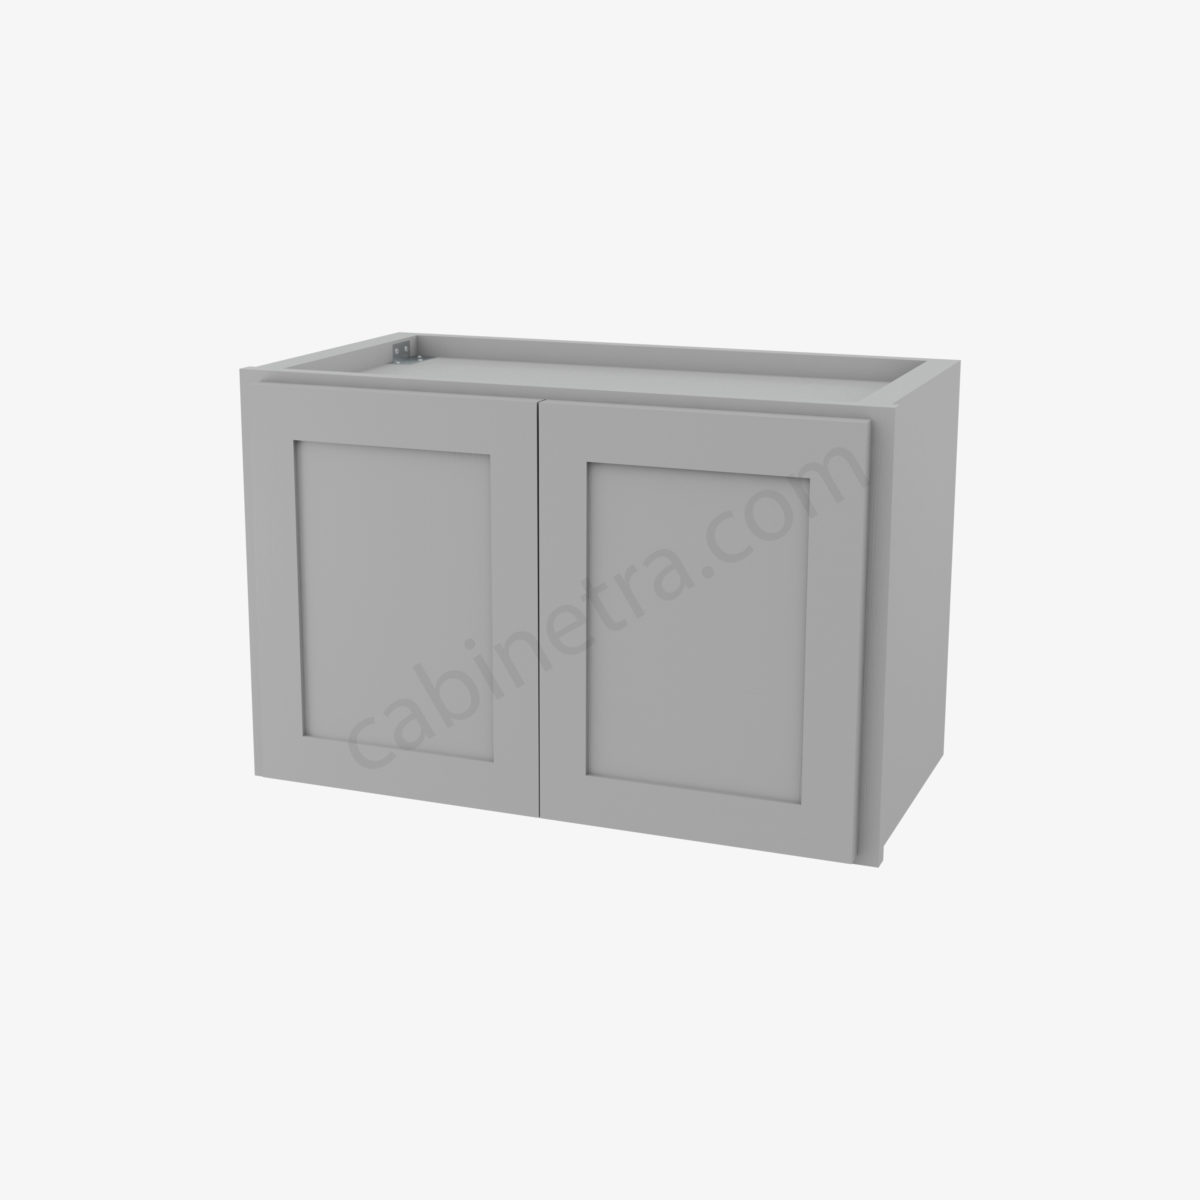 AB W2415B 0 Forevermark Lait Gray Shaker Cabinetra scaled